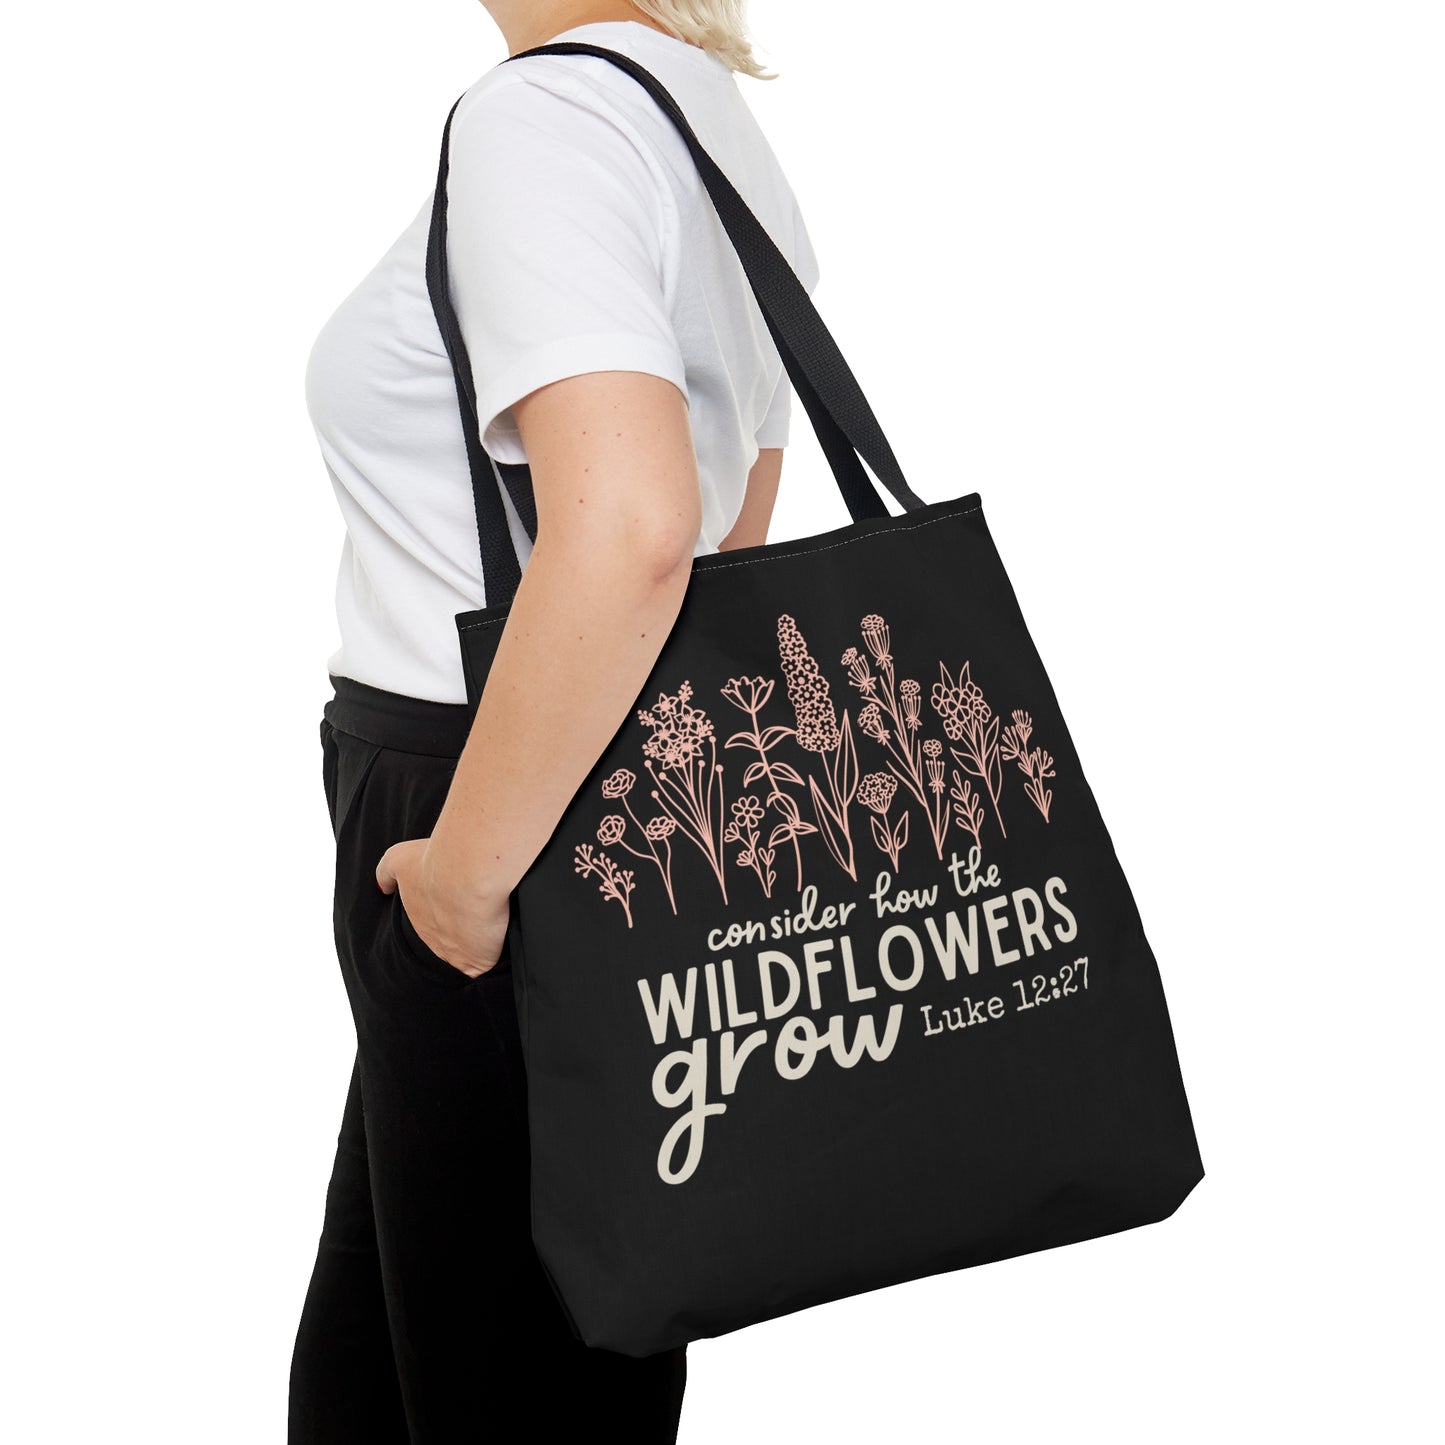 Consider How the Wildflowers Grow - Black Tote Bag